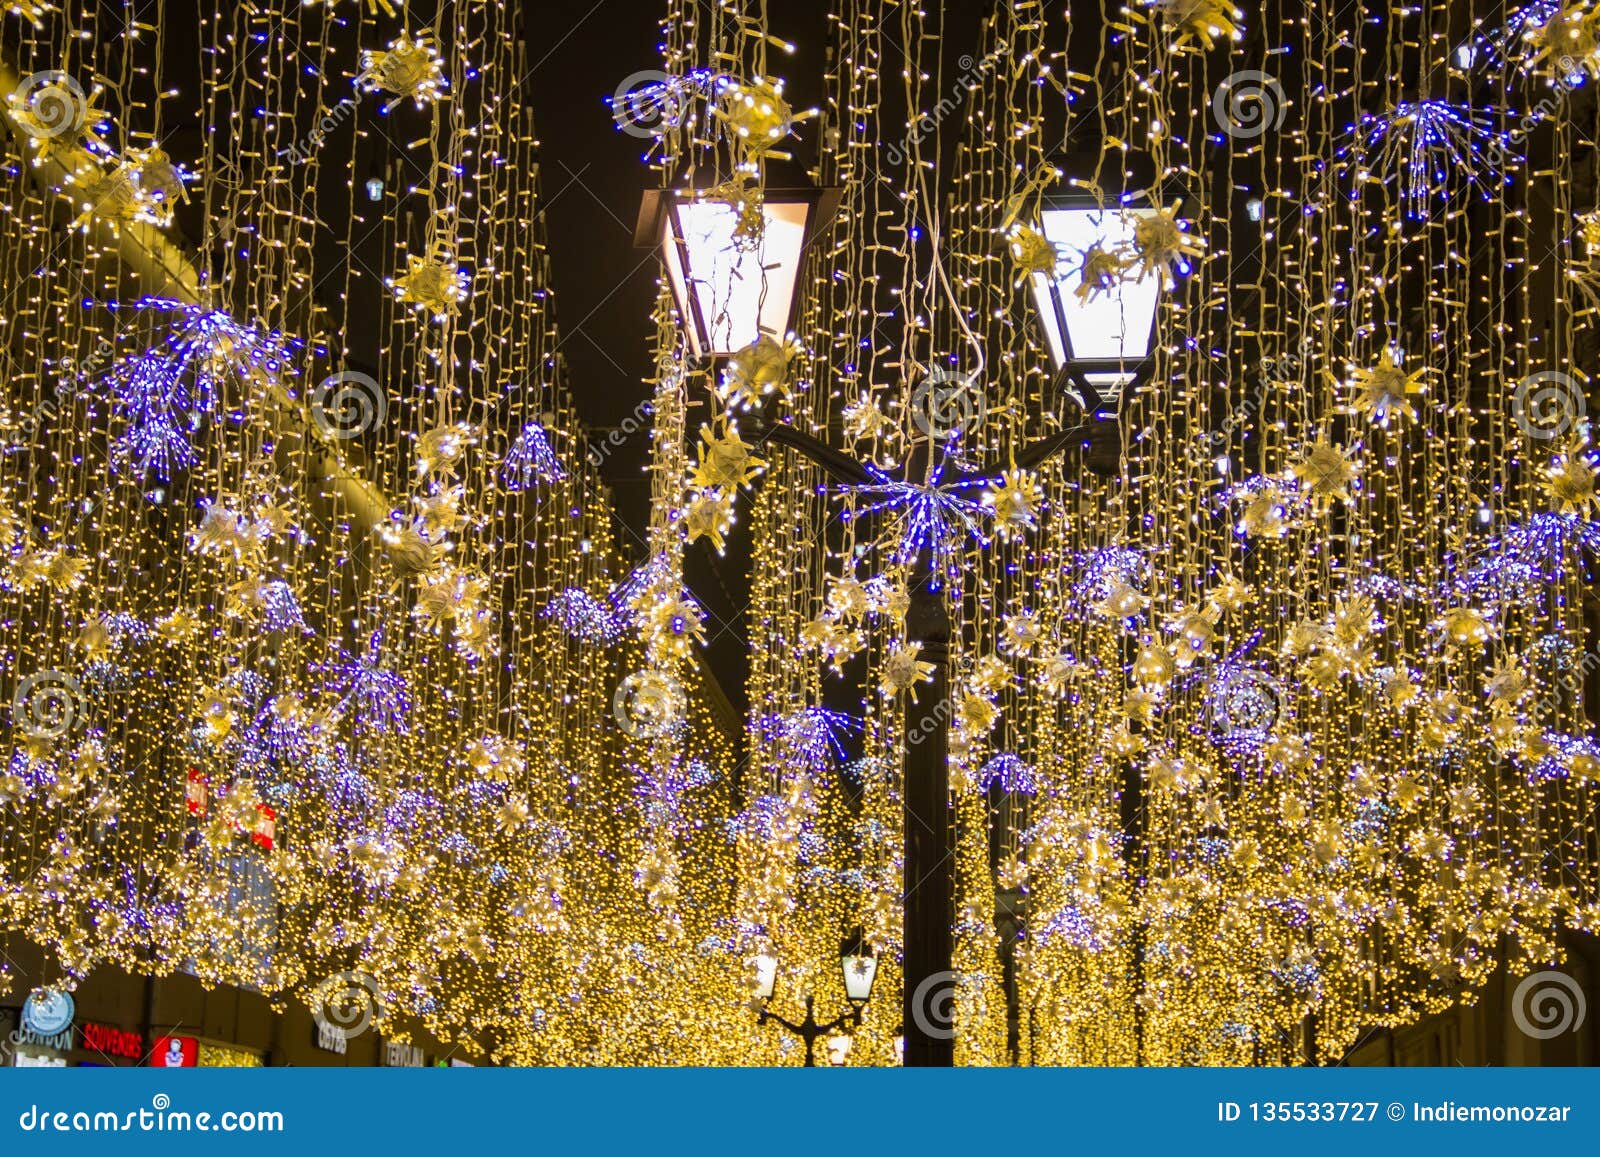 Christmas and New Year Holidays Illumination Outdoor in City Street at ...